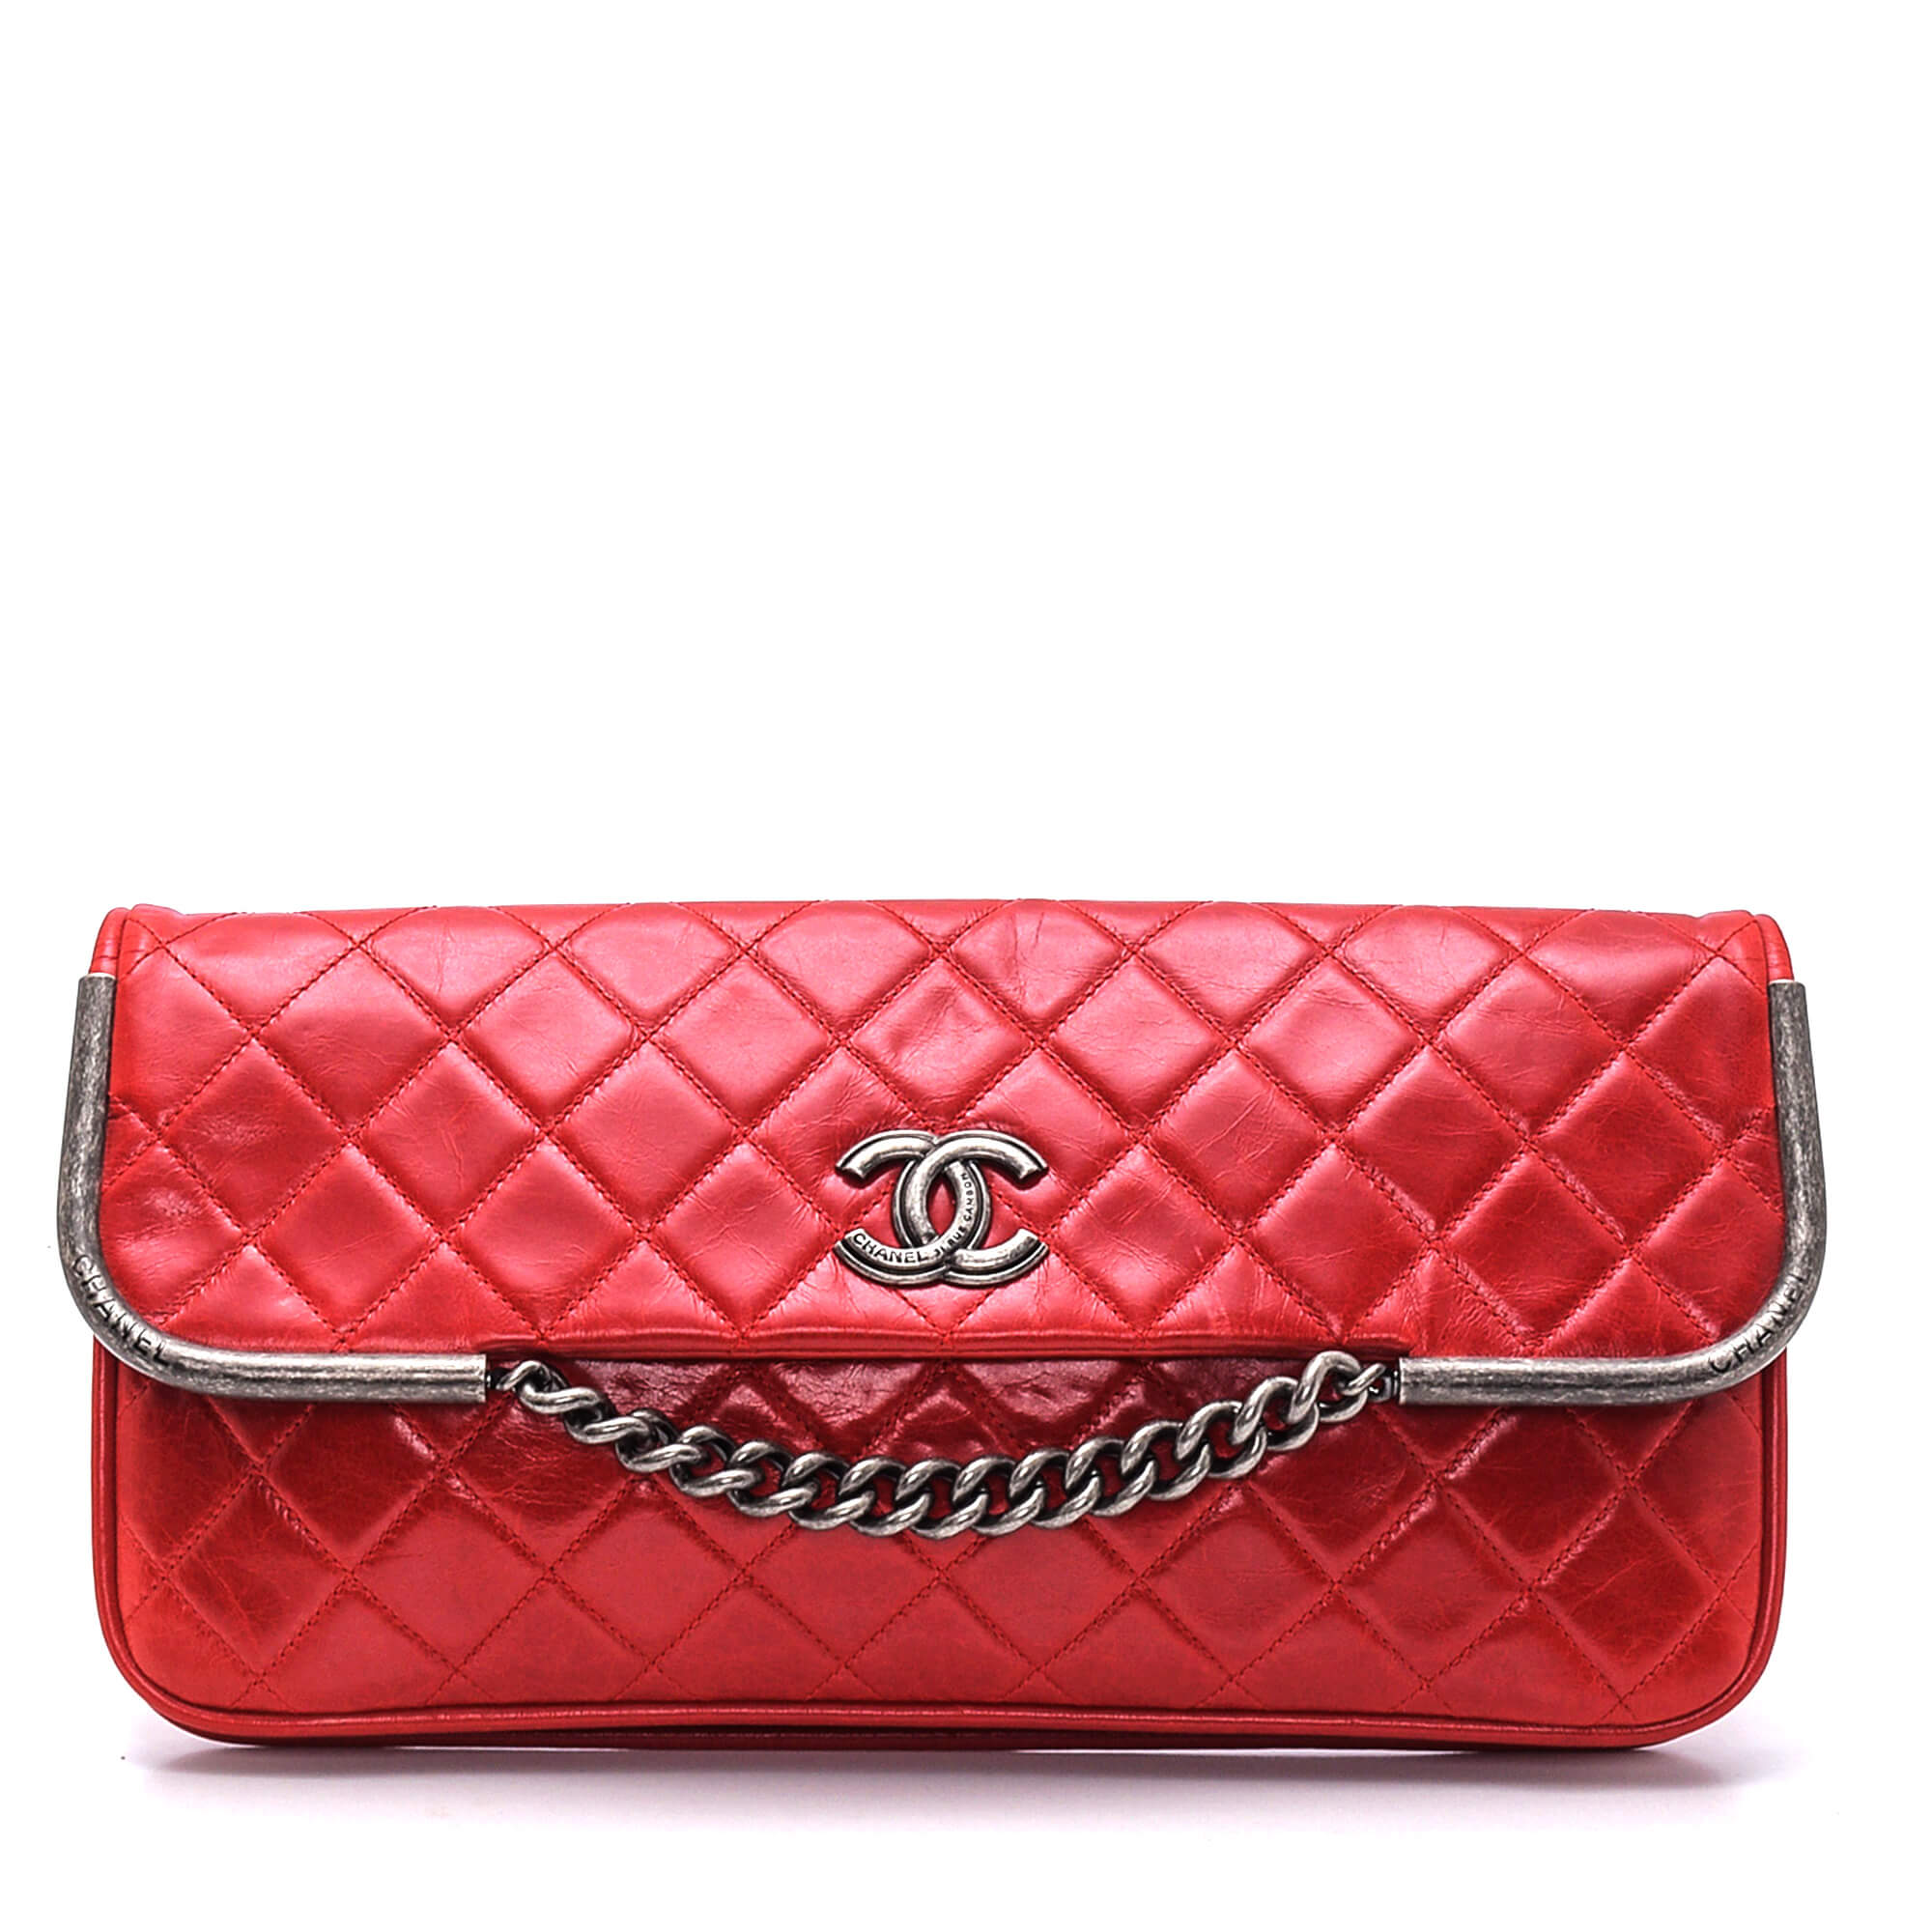 Chanel - Red Quilted Distressed Lambskin Leather Chain Clutch